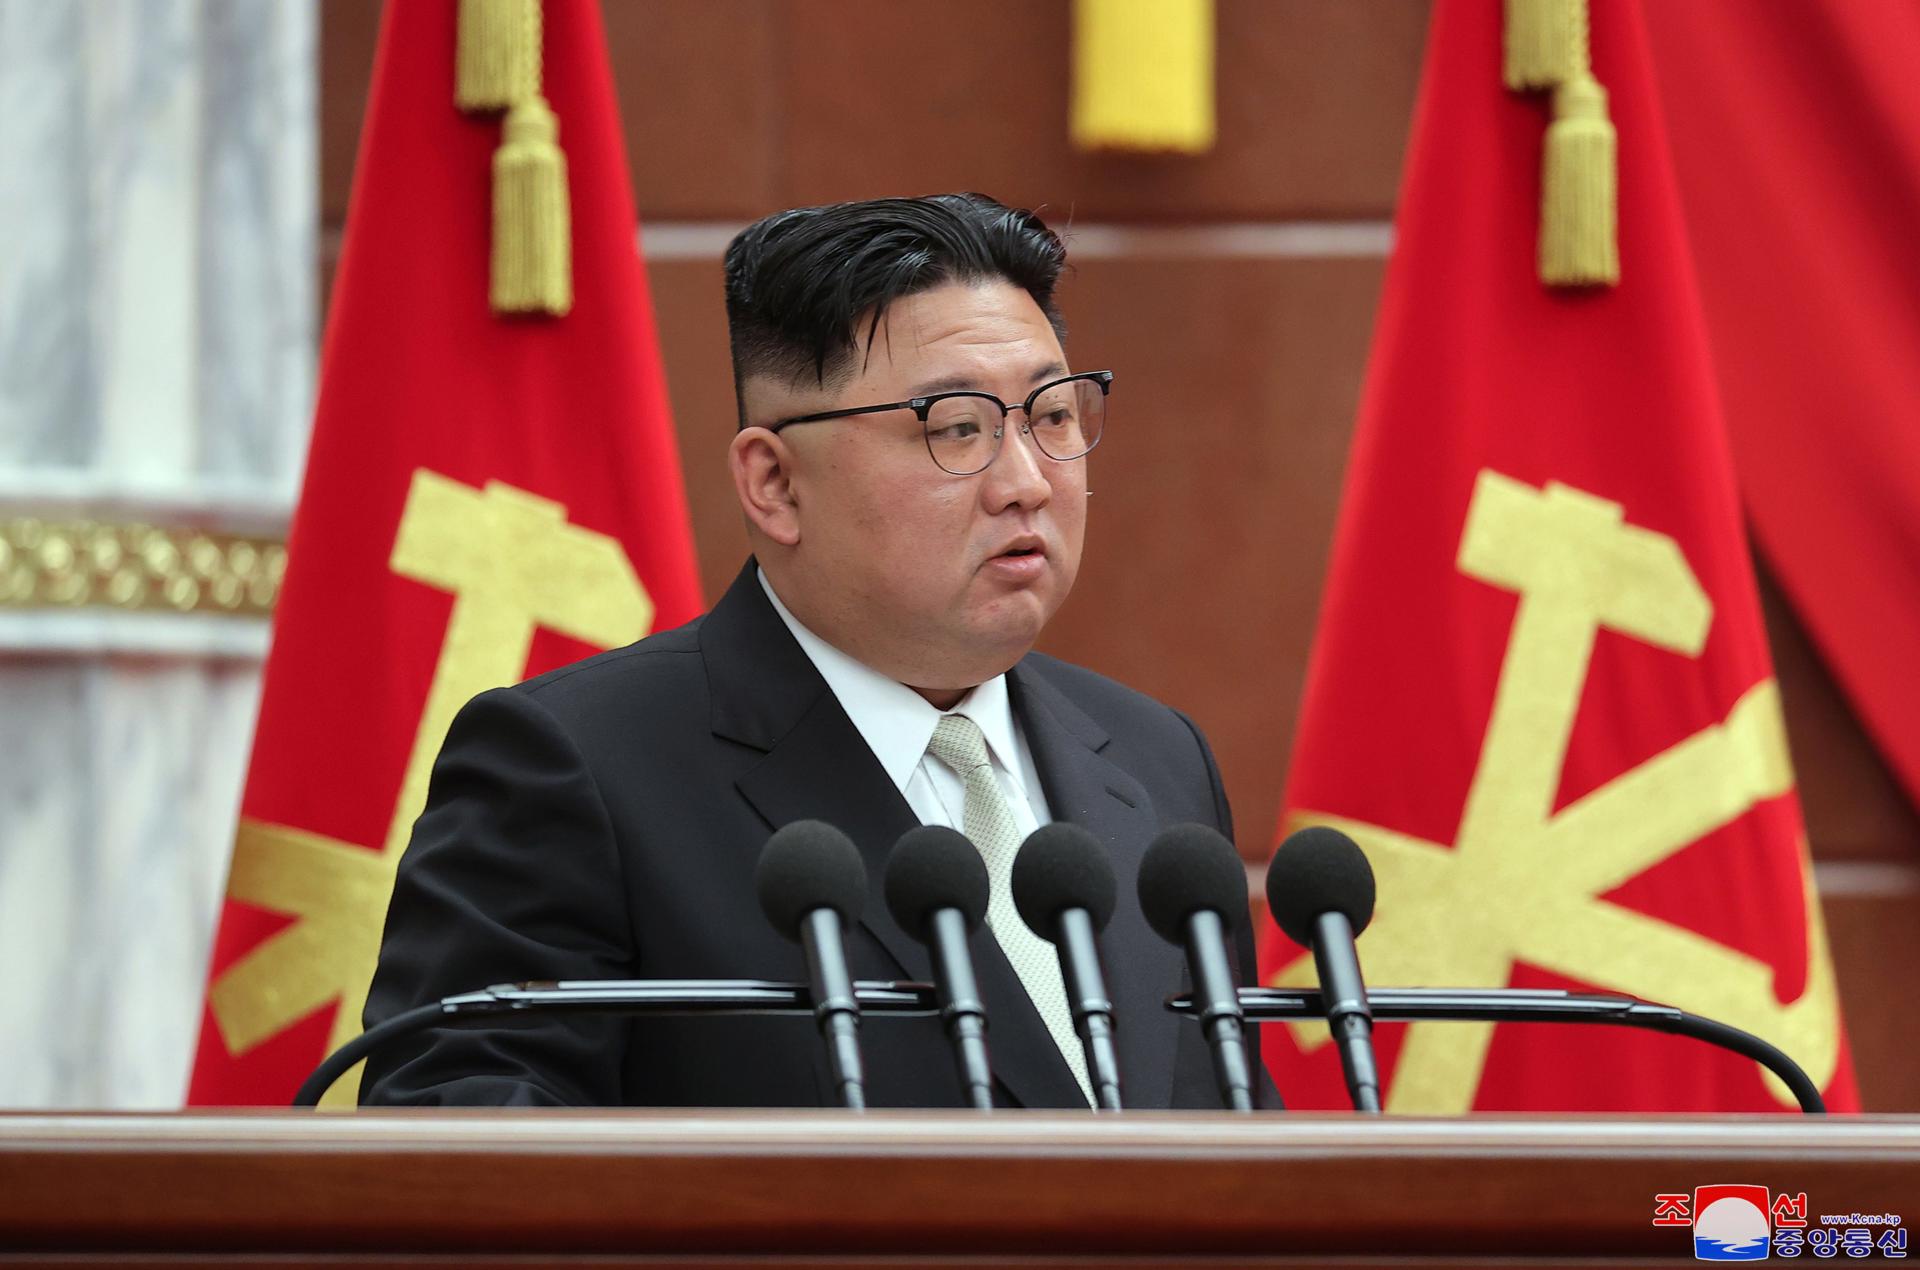 A photo released by the official North Korean Central News Agency (KCNA) shows North Korean Supreme Leader Kim Jong-un presiding over the 7th enlarged plenary meeting of the 8th Central Committee of the Workers' Party of Korea (WPK) at the office building of the WPK Central Committee in Pyongyang, North Korea, 26 February 2023 (issued 27 February 2023). EFE-EPA/KCNA EDITORIAL USE ONLY